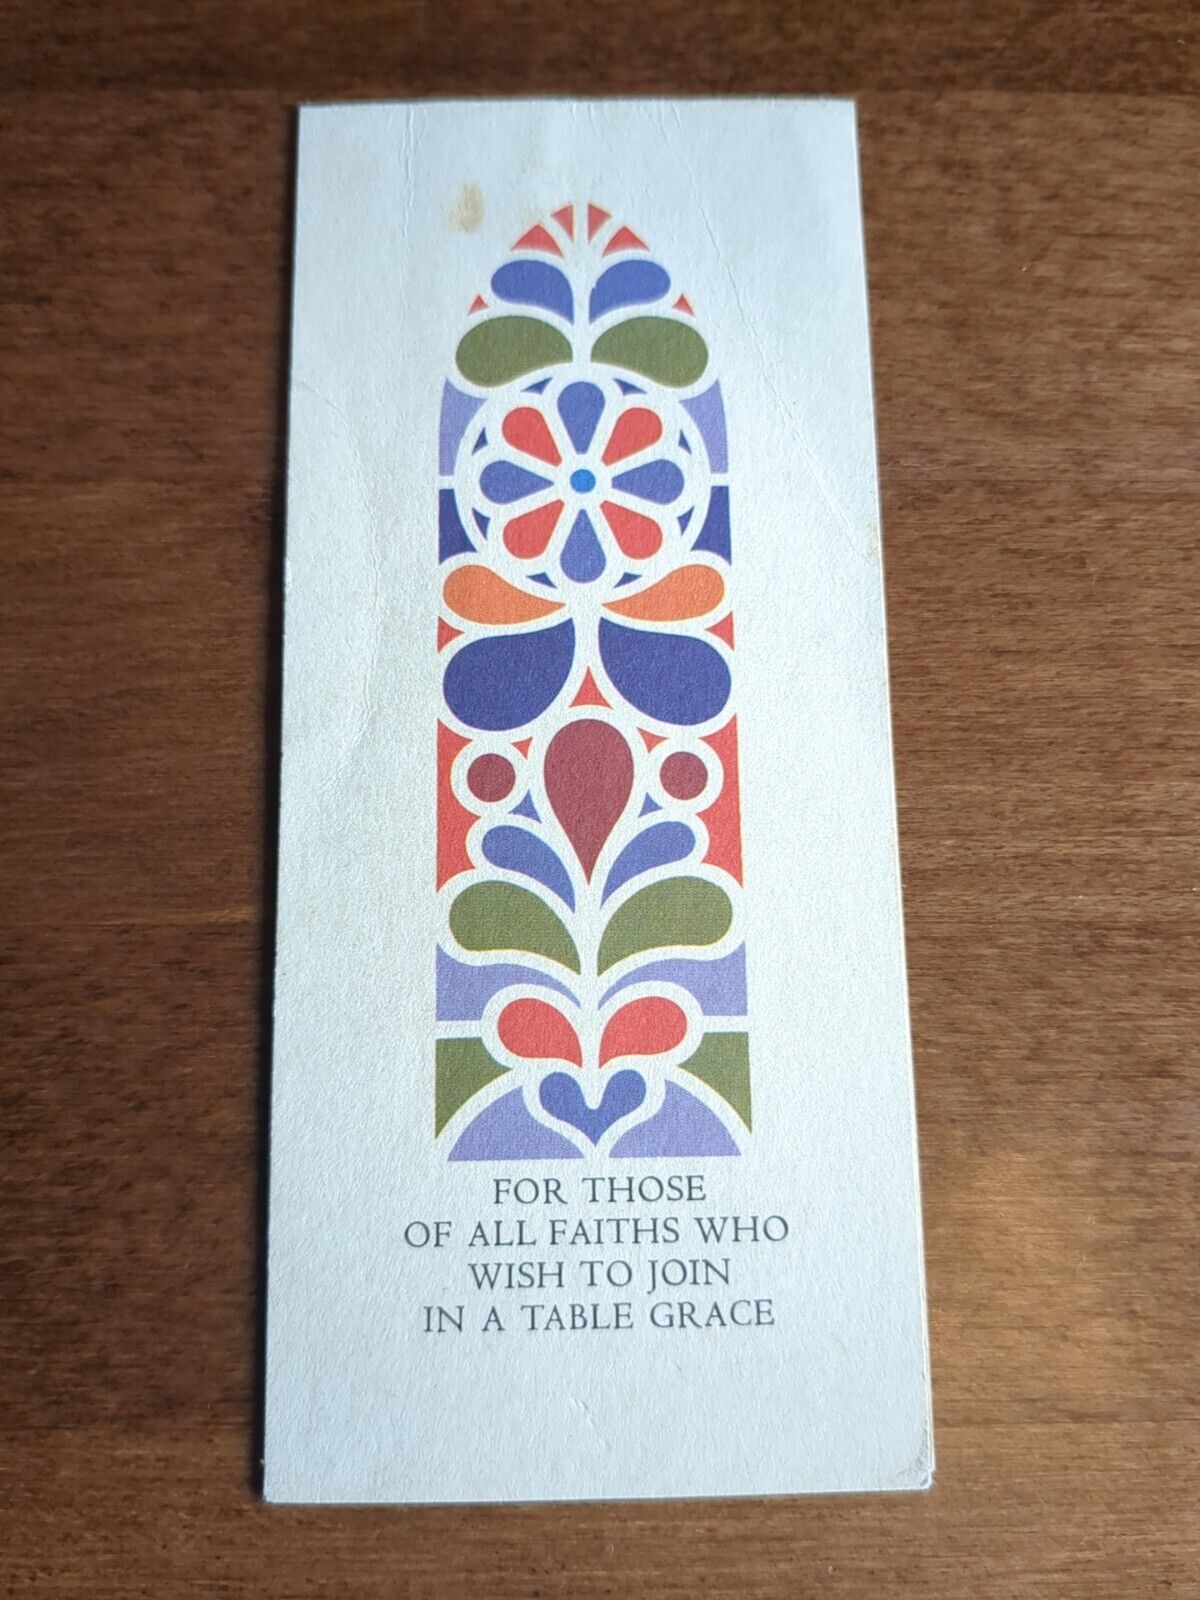 VINTAGE CONTINENTAL AIRLINES AIRPLANE PSALMS MEAL PRAYER CARD - COLLECTIBLES